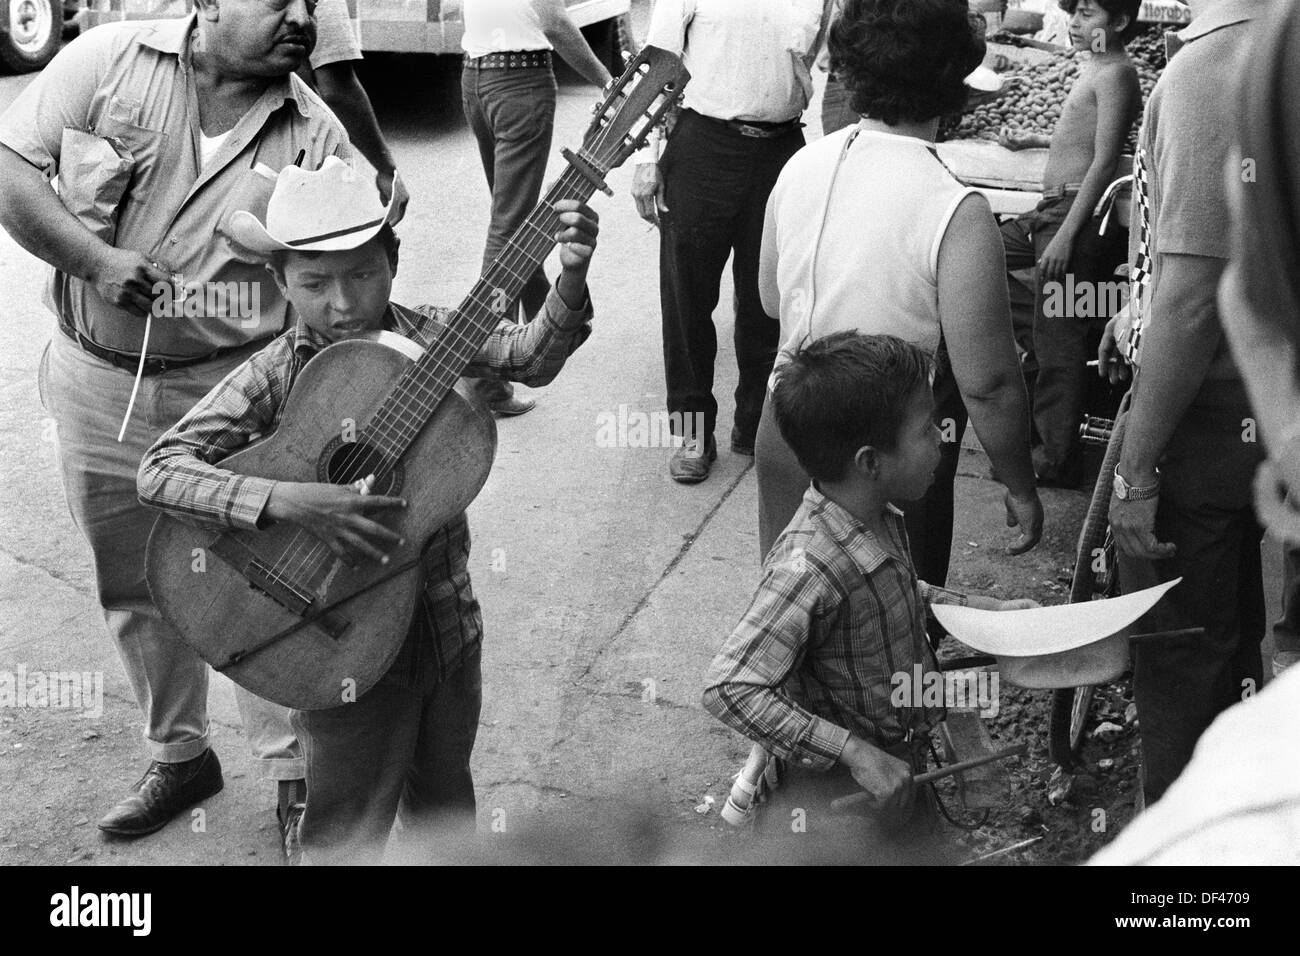 Mazatlan Mexico. Children busking in the street, brother, young sibling collecting in his hat and playing a simple wooden percussion block. Mexican state of Sinaloa 1973. HOMER SYKES Stock Photo